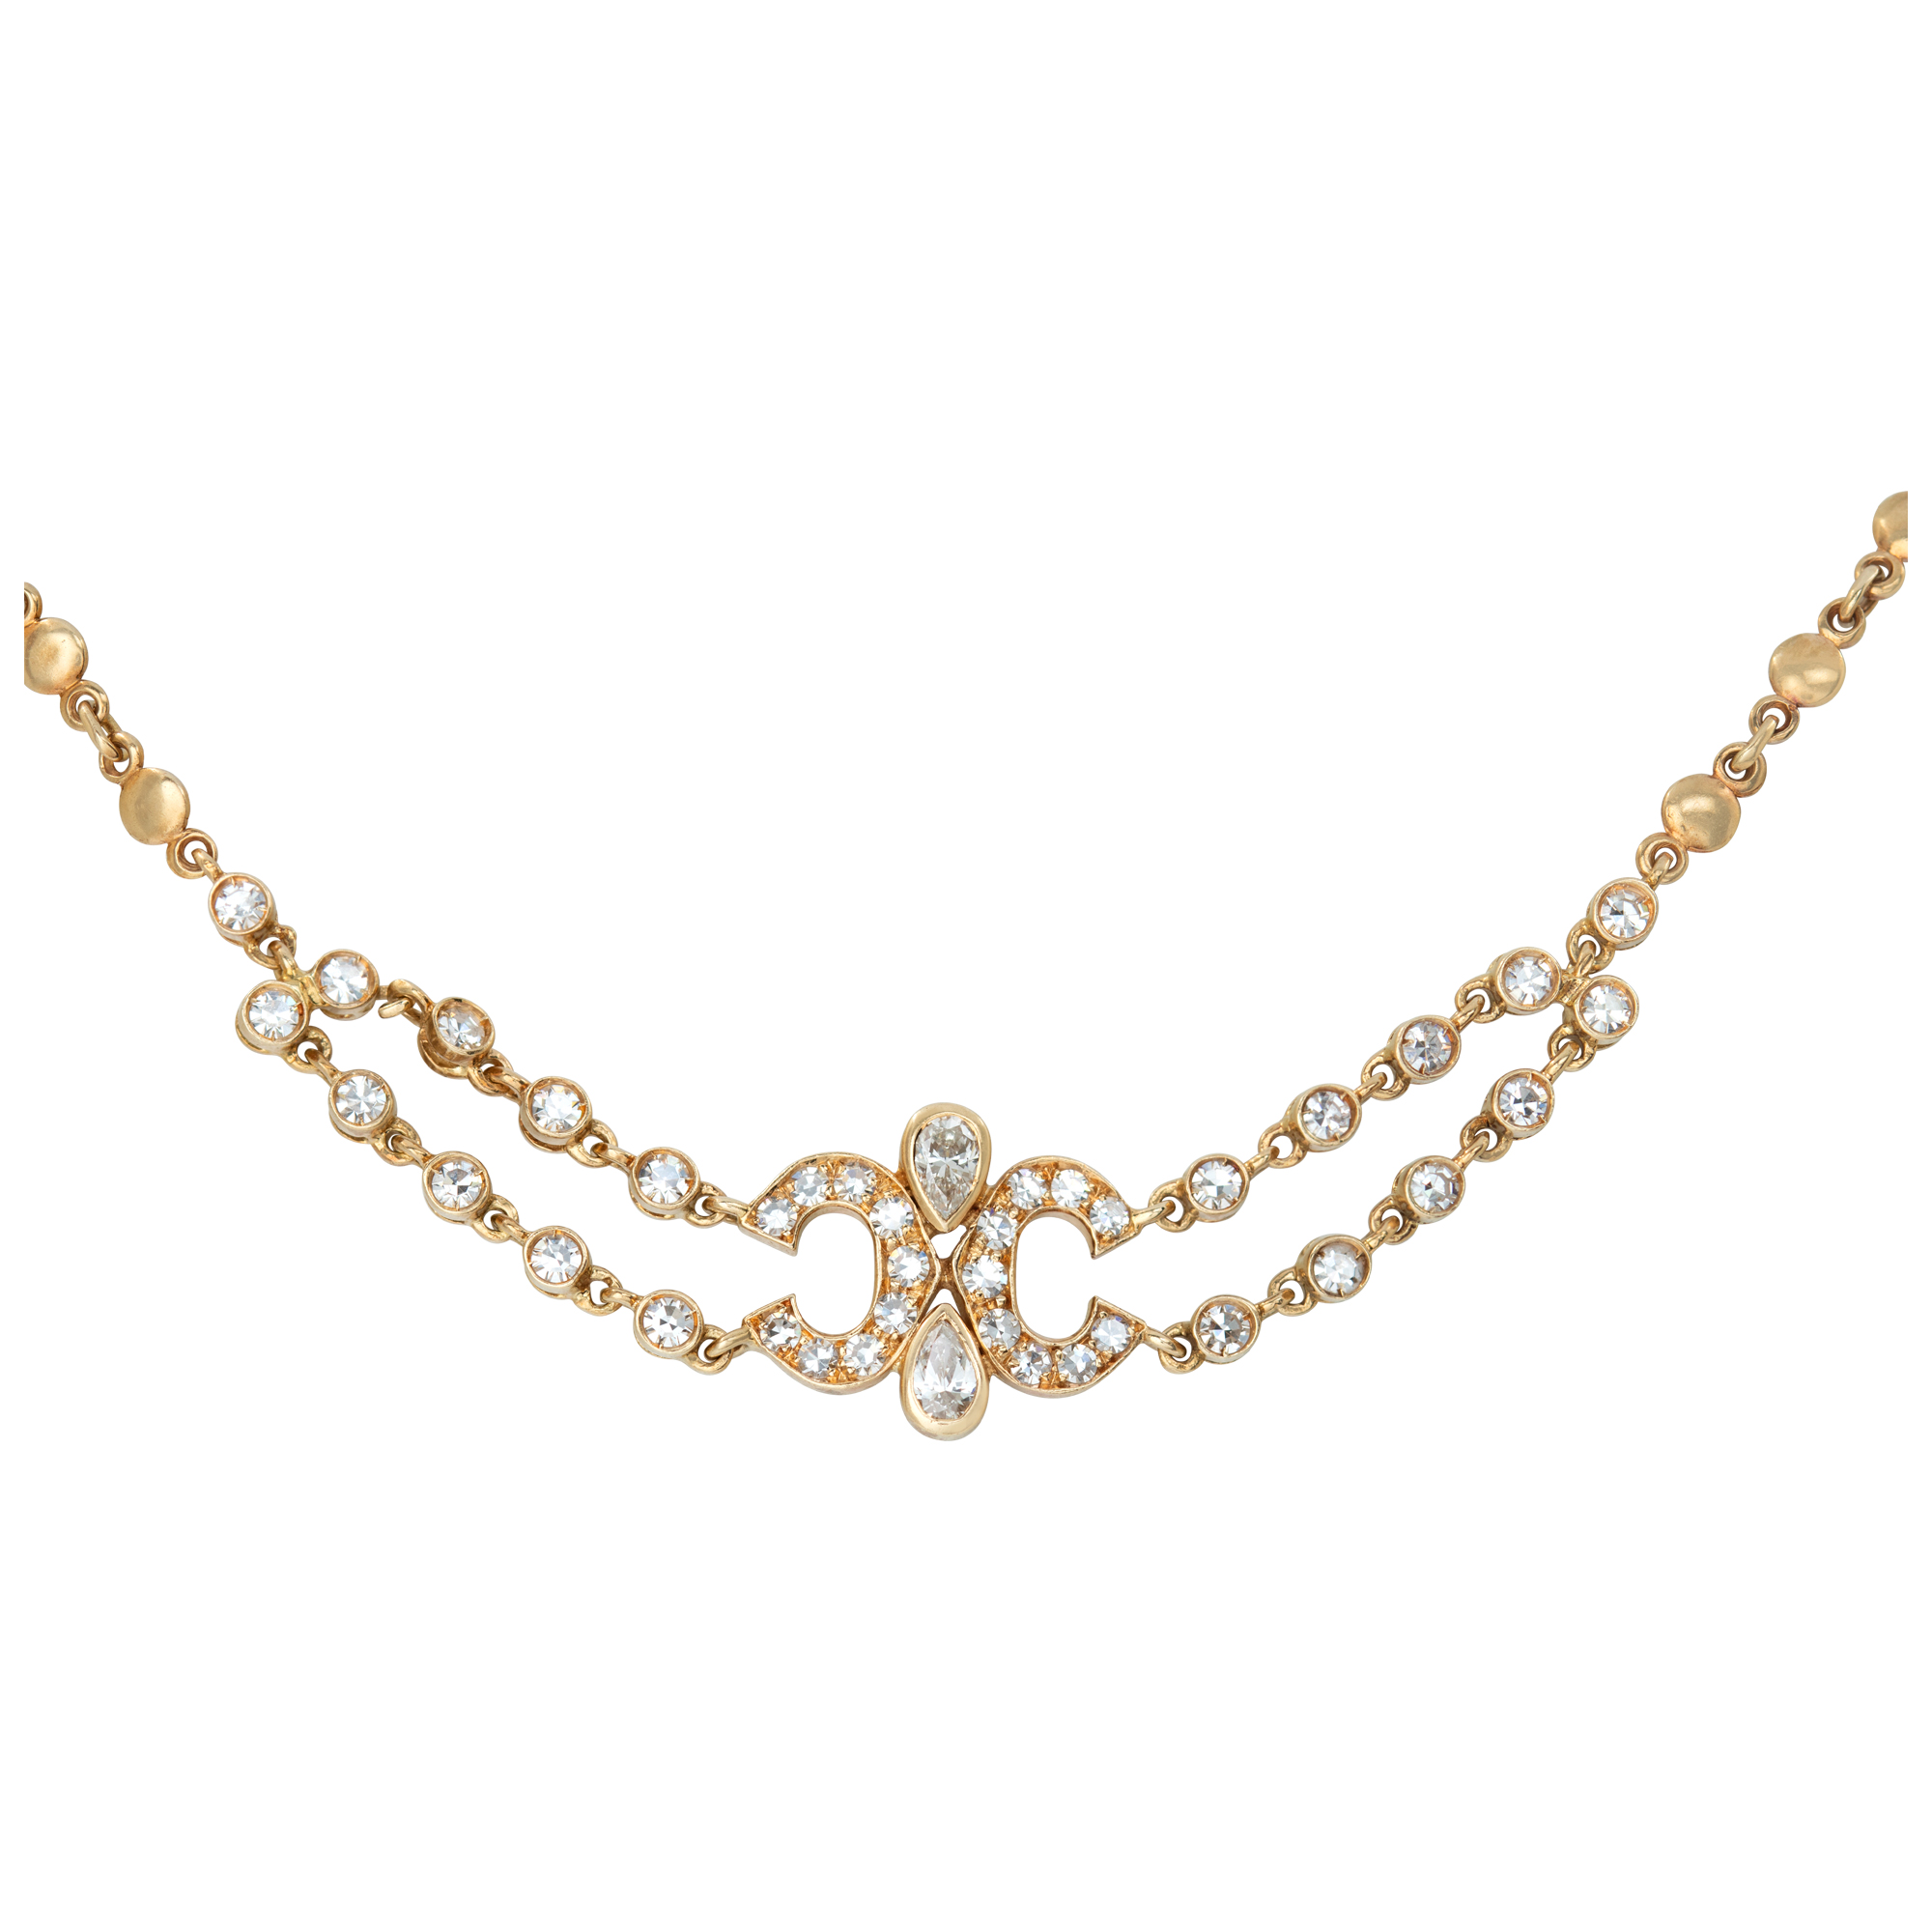 Cartier "Tour De Cou" Diamond Flexible 18k Yellow Gold Chain/Necklace With 40 Round And Pear Shape Cut Diamonds.Total Approx. Diamonds Weigh: 1.24 Carat